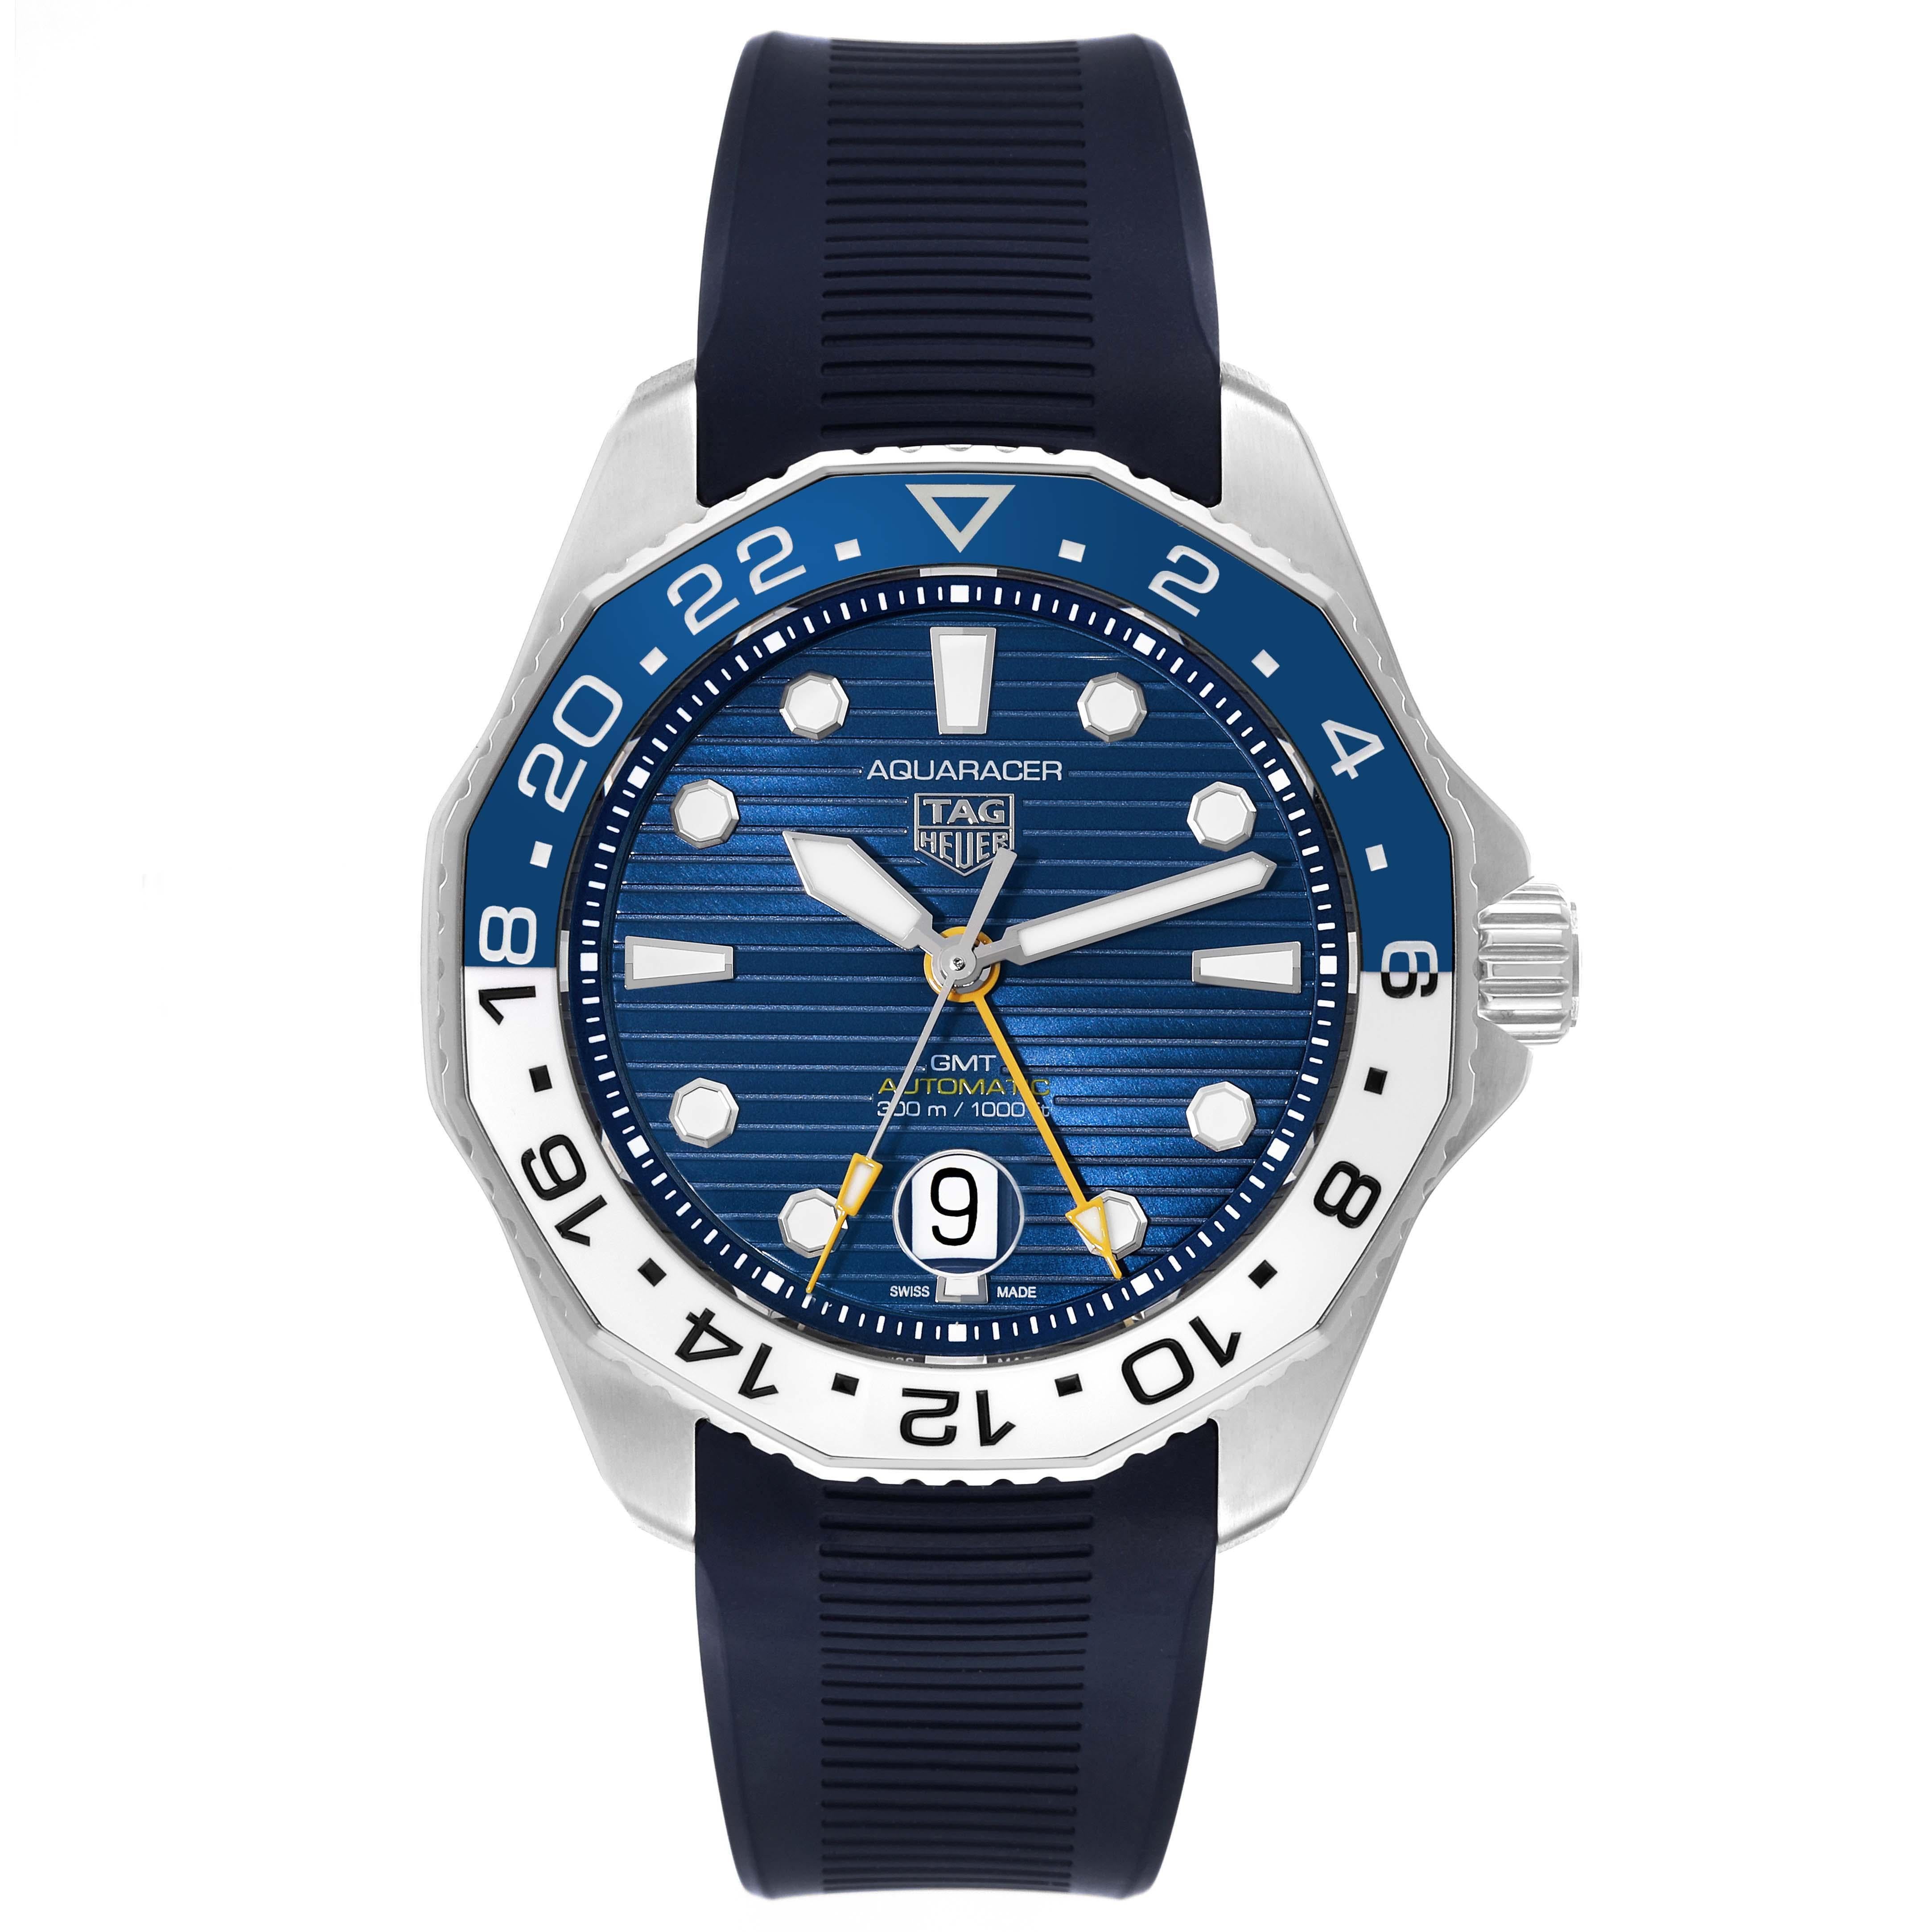 Tag Heuer Aquaracer Professional GMT Blue Dial Steel Mens Watch WBP2010 Box Card. Automatic self-winding GMT movement. Stainless steel case 43.0 mm in diameter. Blue and white bi-directional rotating ceramic bezel. Scratch resistant sapphire crystal